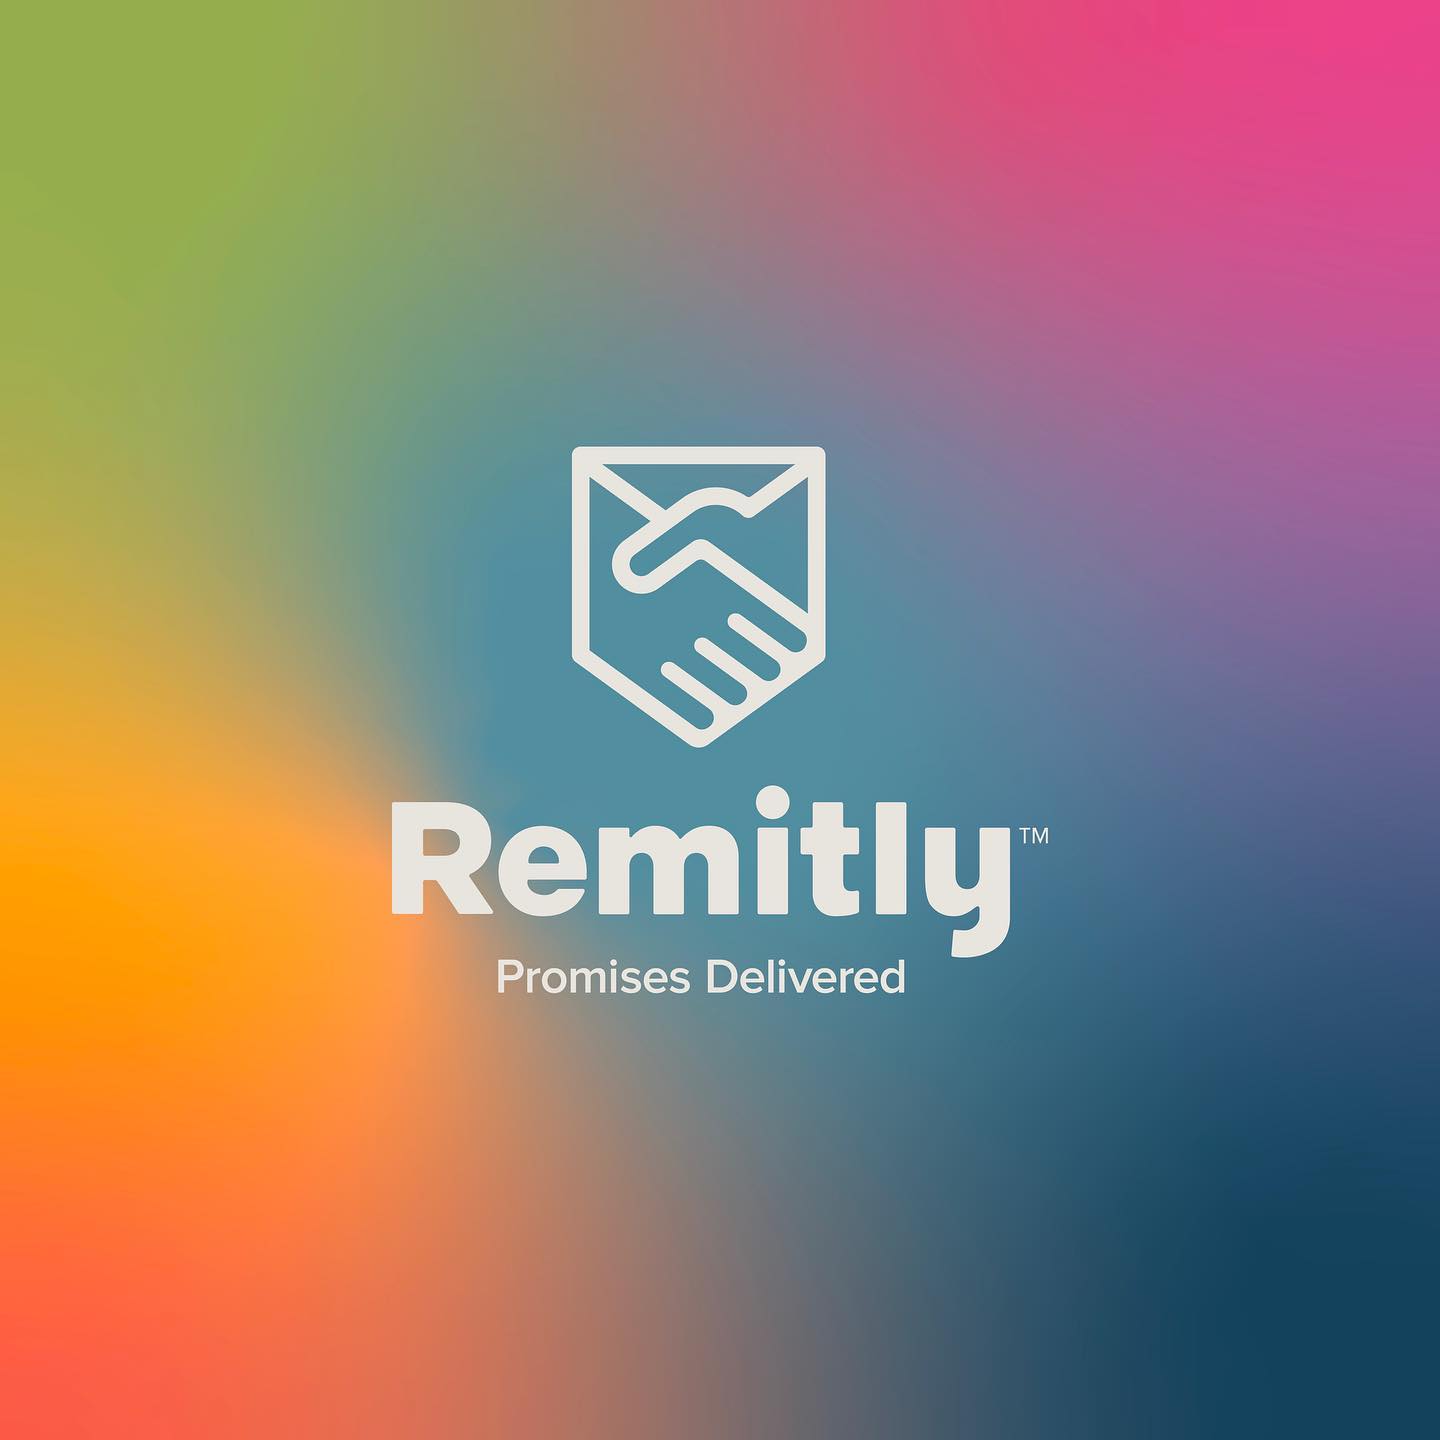 Remitly logo over colorful gradient